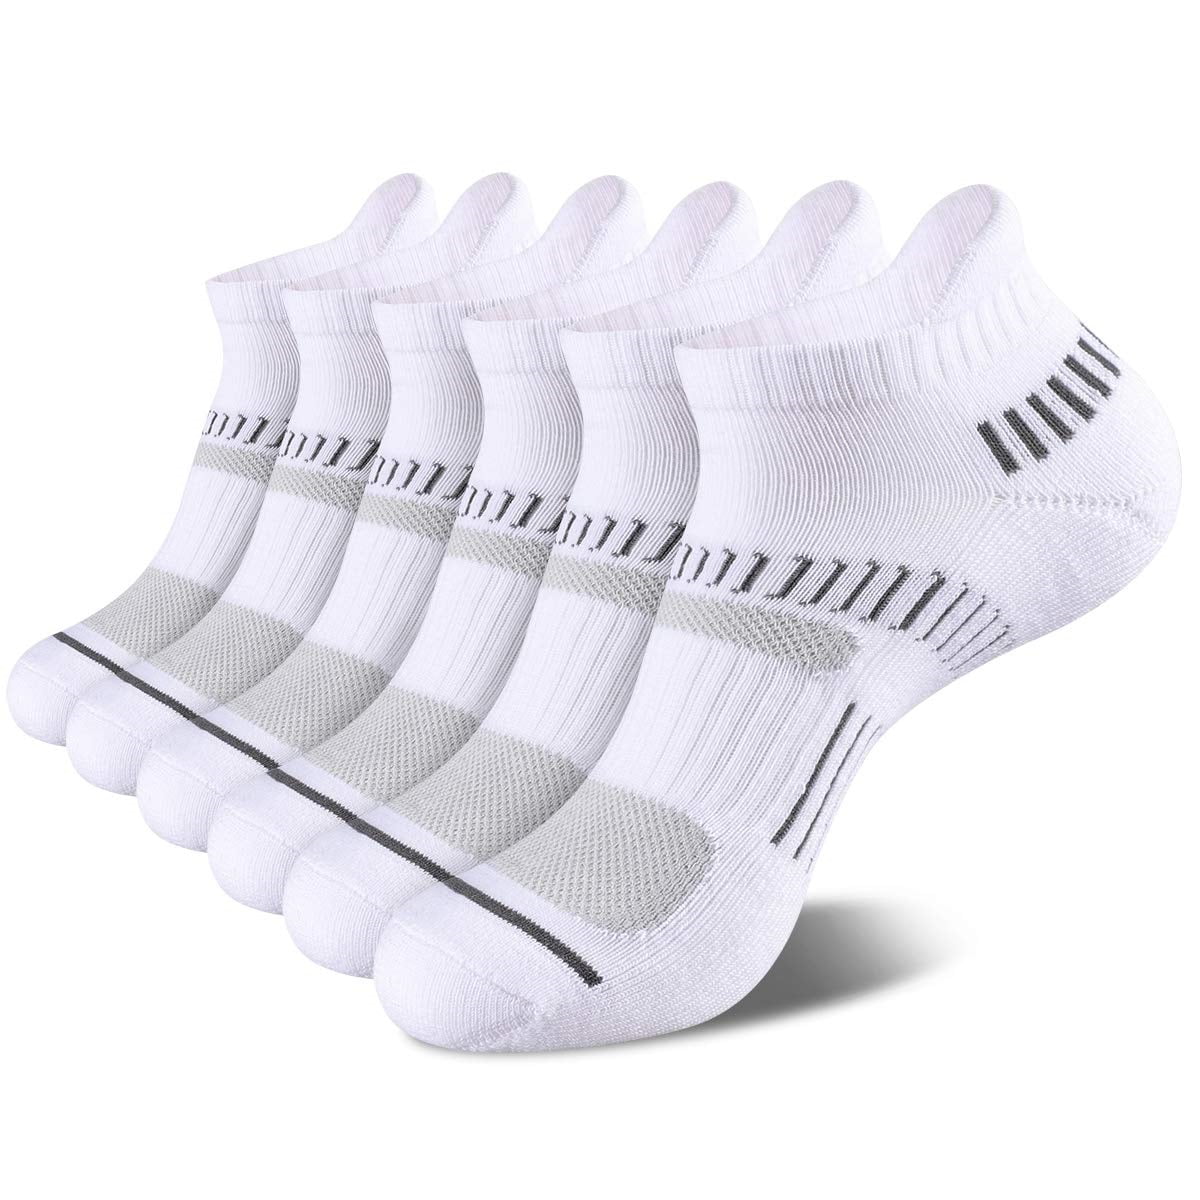 COOPLUS Male Sock Size 10-13 Men’s Athletic Ankle Performance Low Cut Socks 6 Pairs